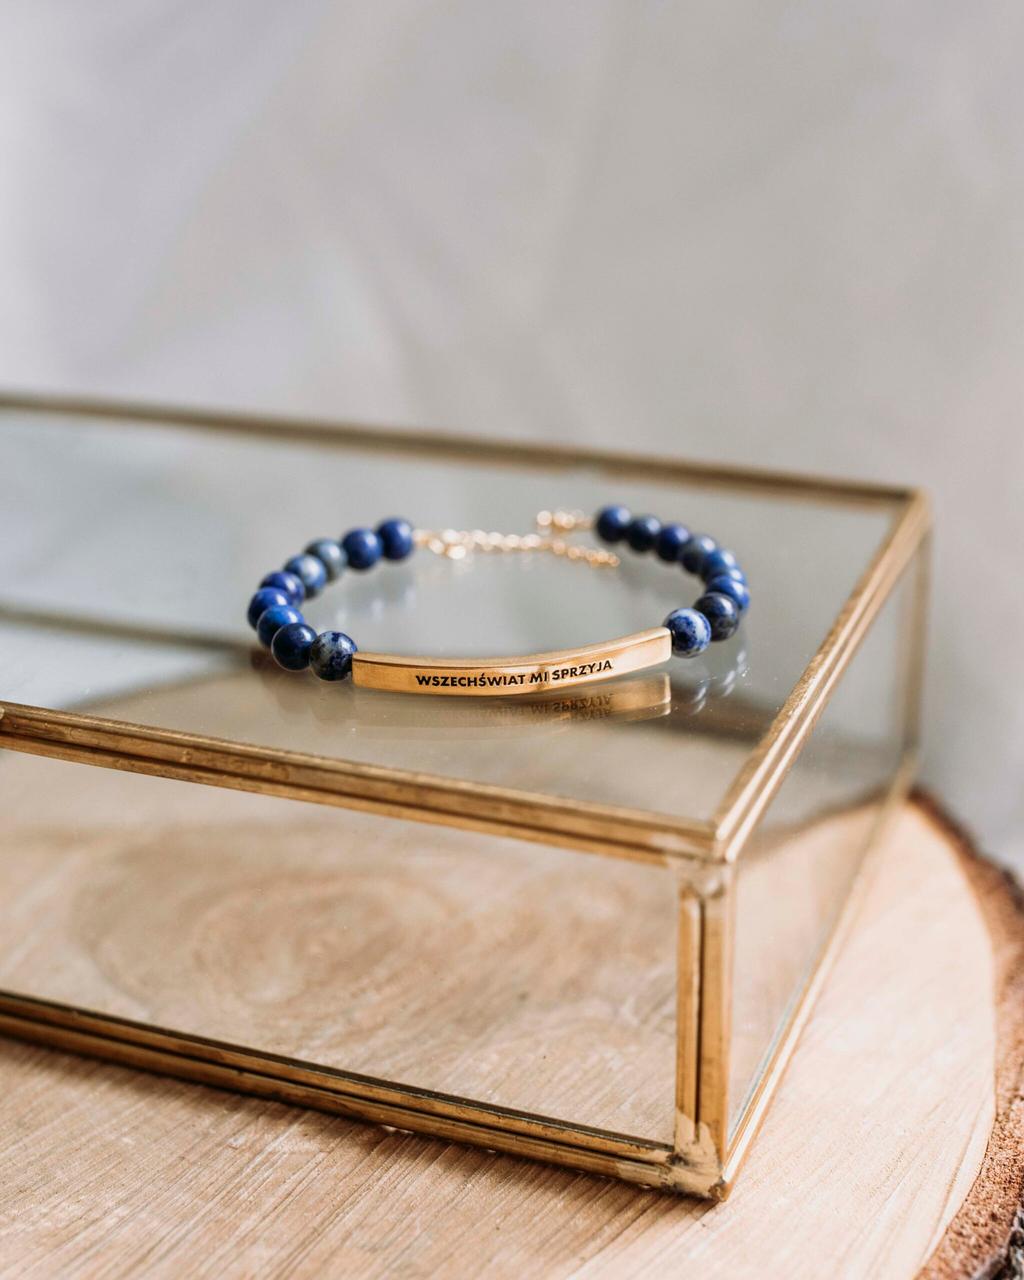 LAPIS LAZULI bracelet with a gold-plated plate / clasp